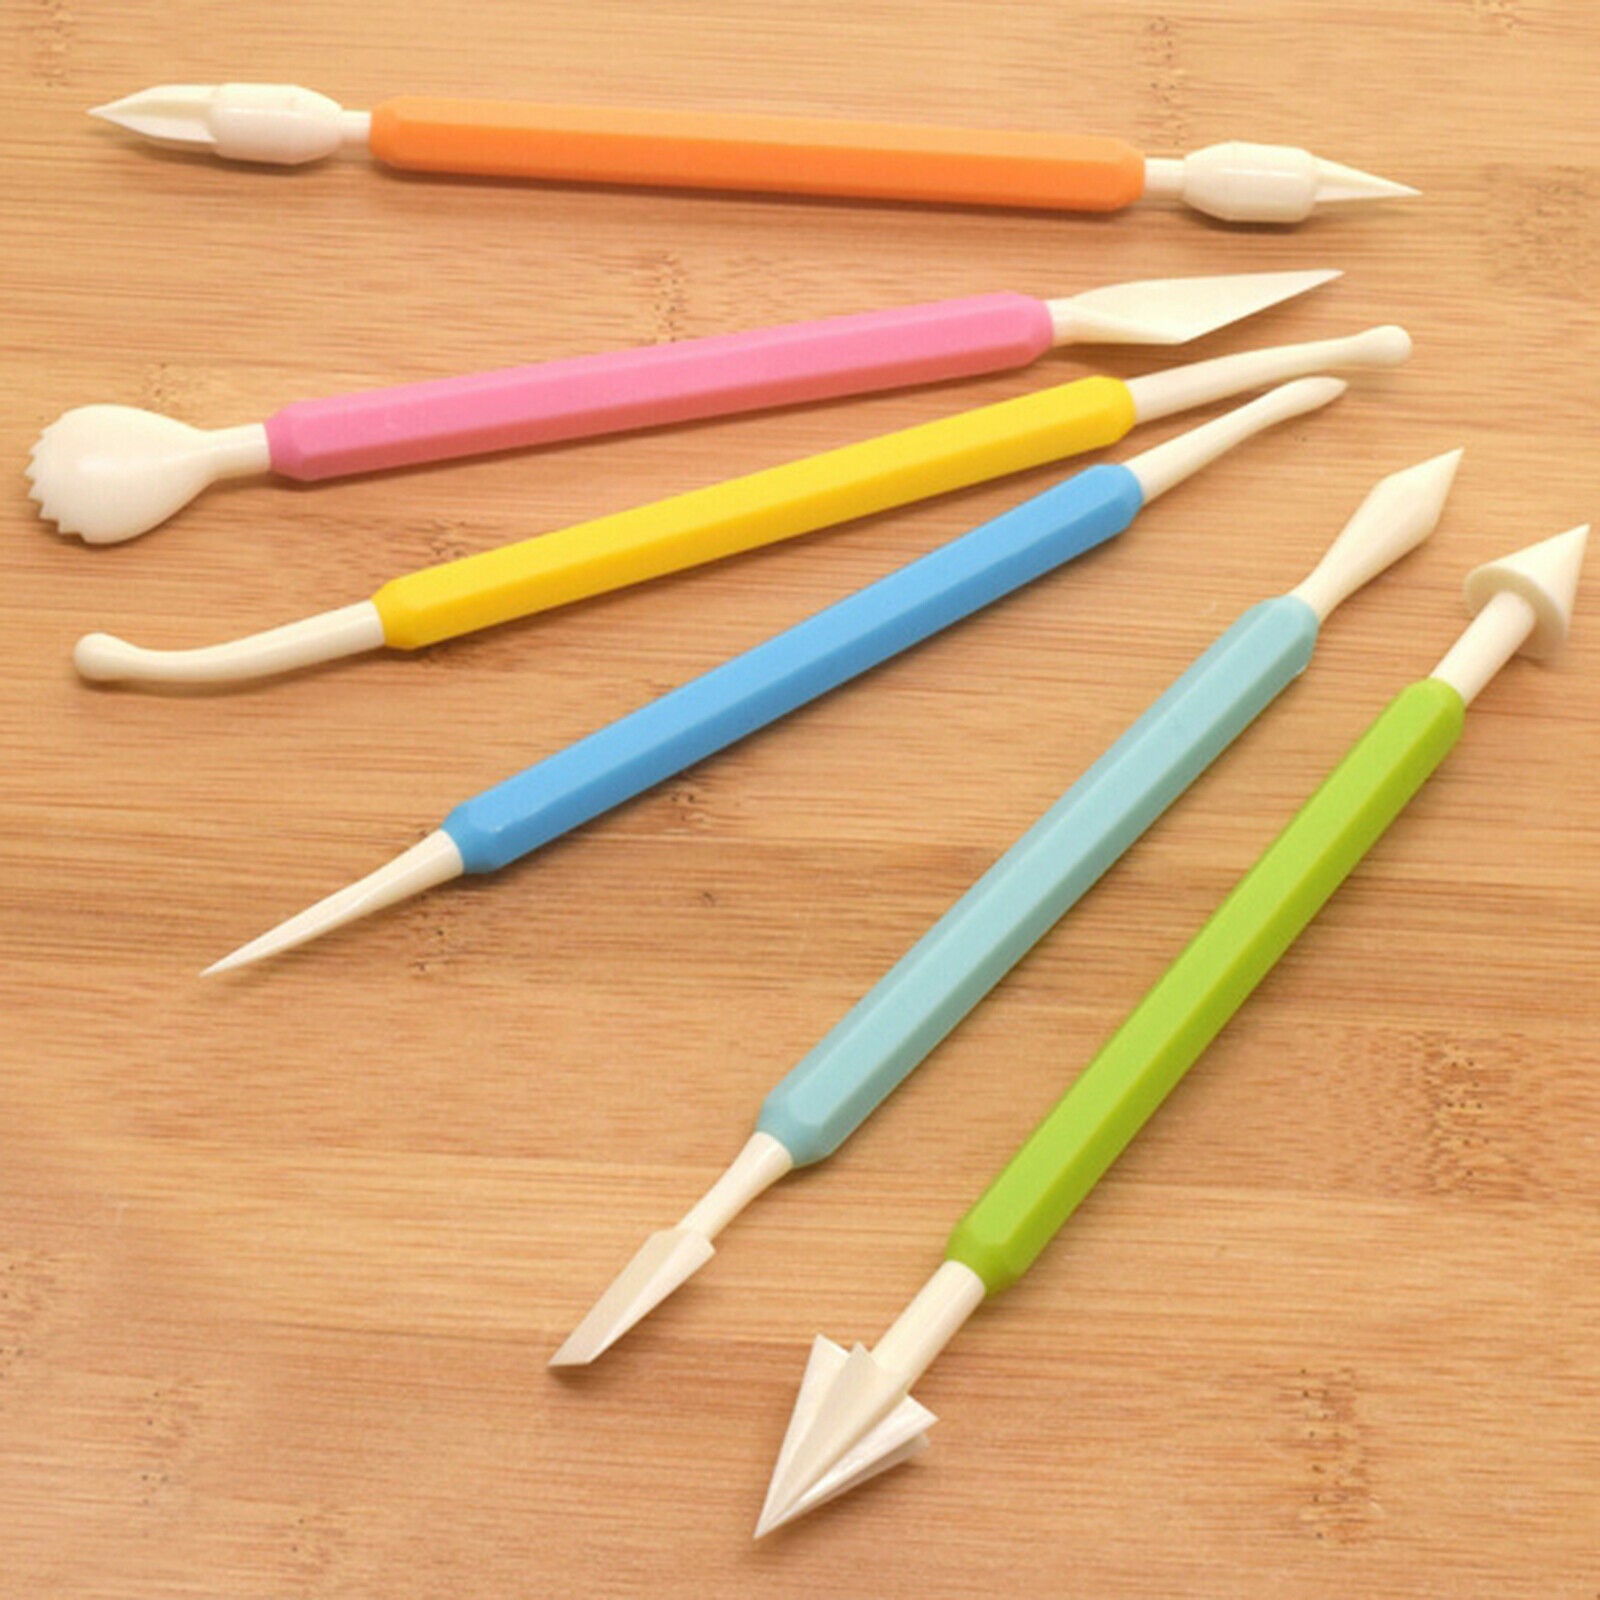 9x Plastic Clay Sculpting Tools Set DIY Ceramic Pottery Modeling Smoothing